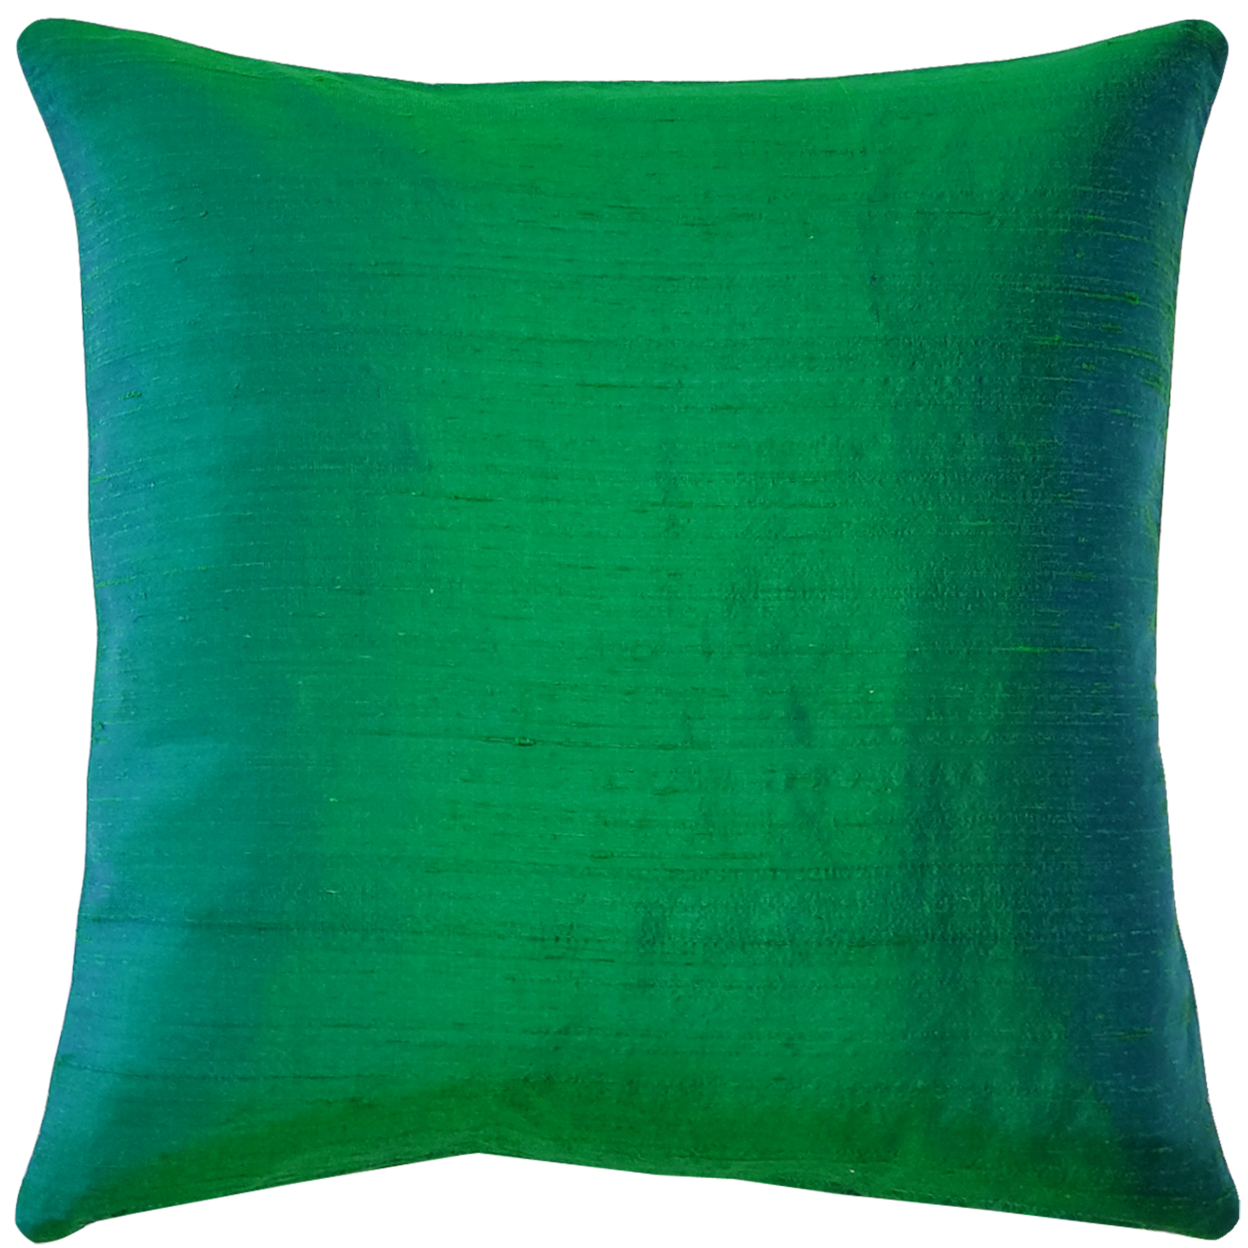 Sankara Emerald Green Silk Throw Pillow 16x16 Inches Square, Complete Pillow With Polyfill Pillow Insert